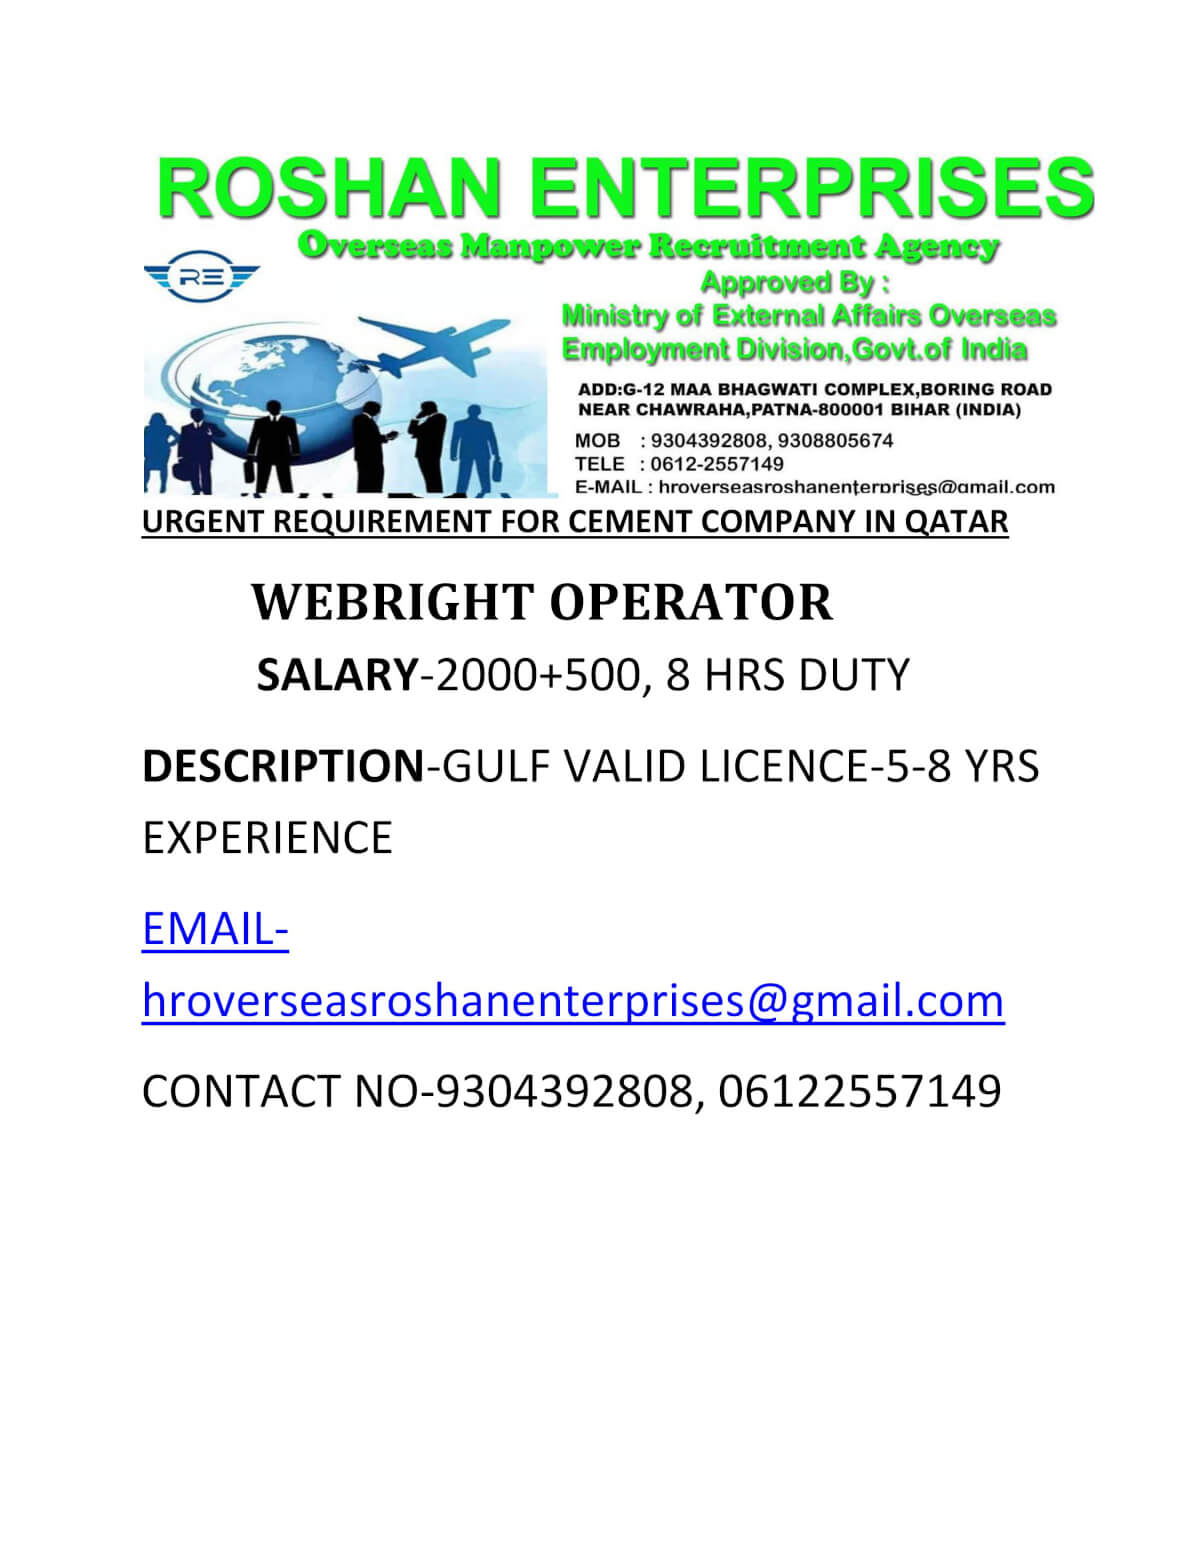 Urgent requirement Webright Operator for cement company in Qatar